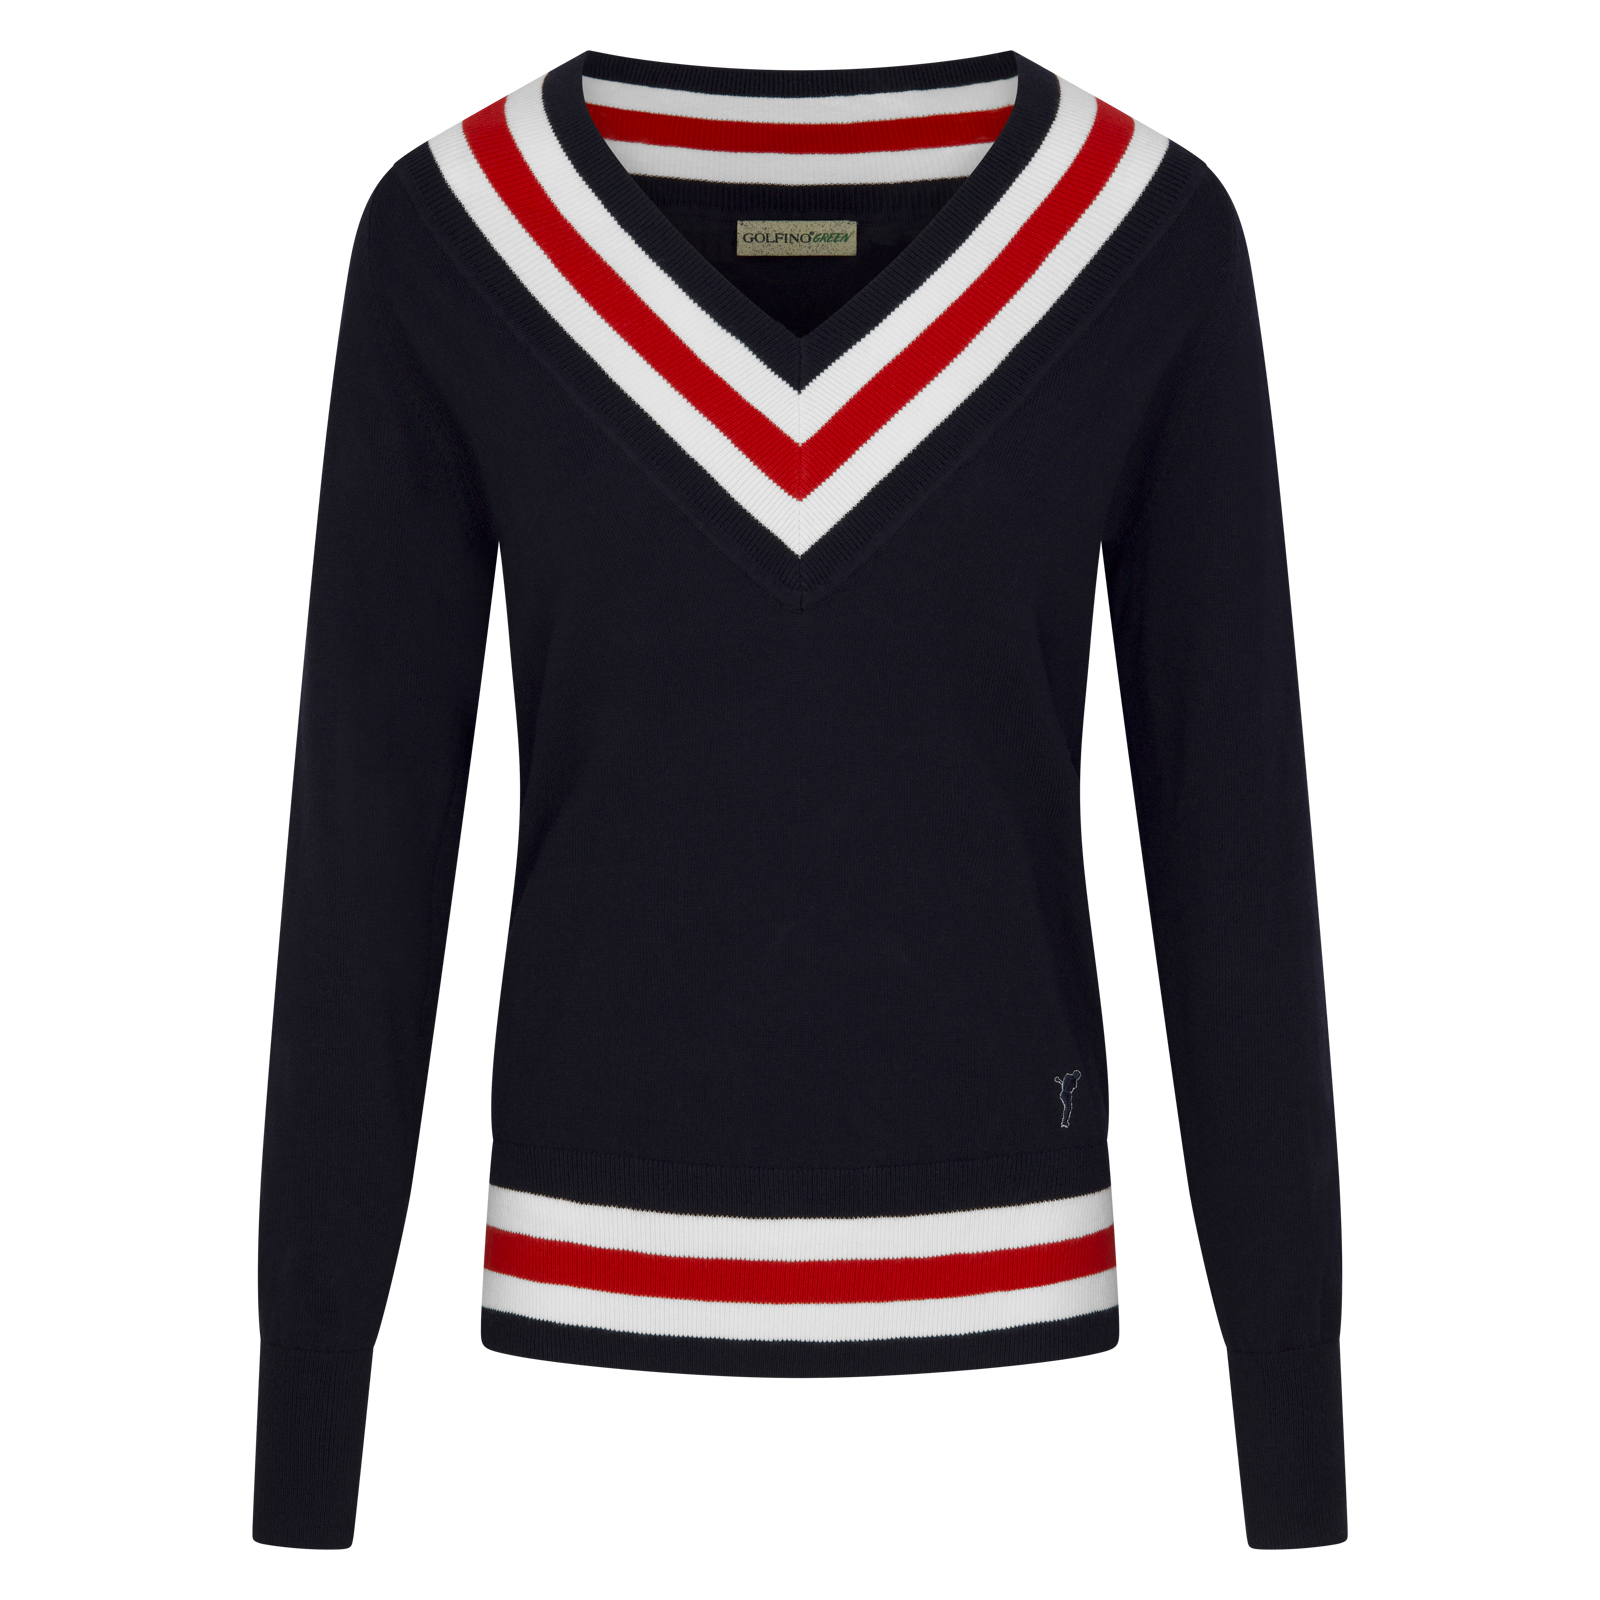 Ladies' extravagant V-neck golf sweater in organic cotton with cashmere